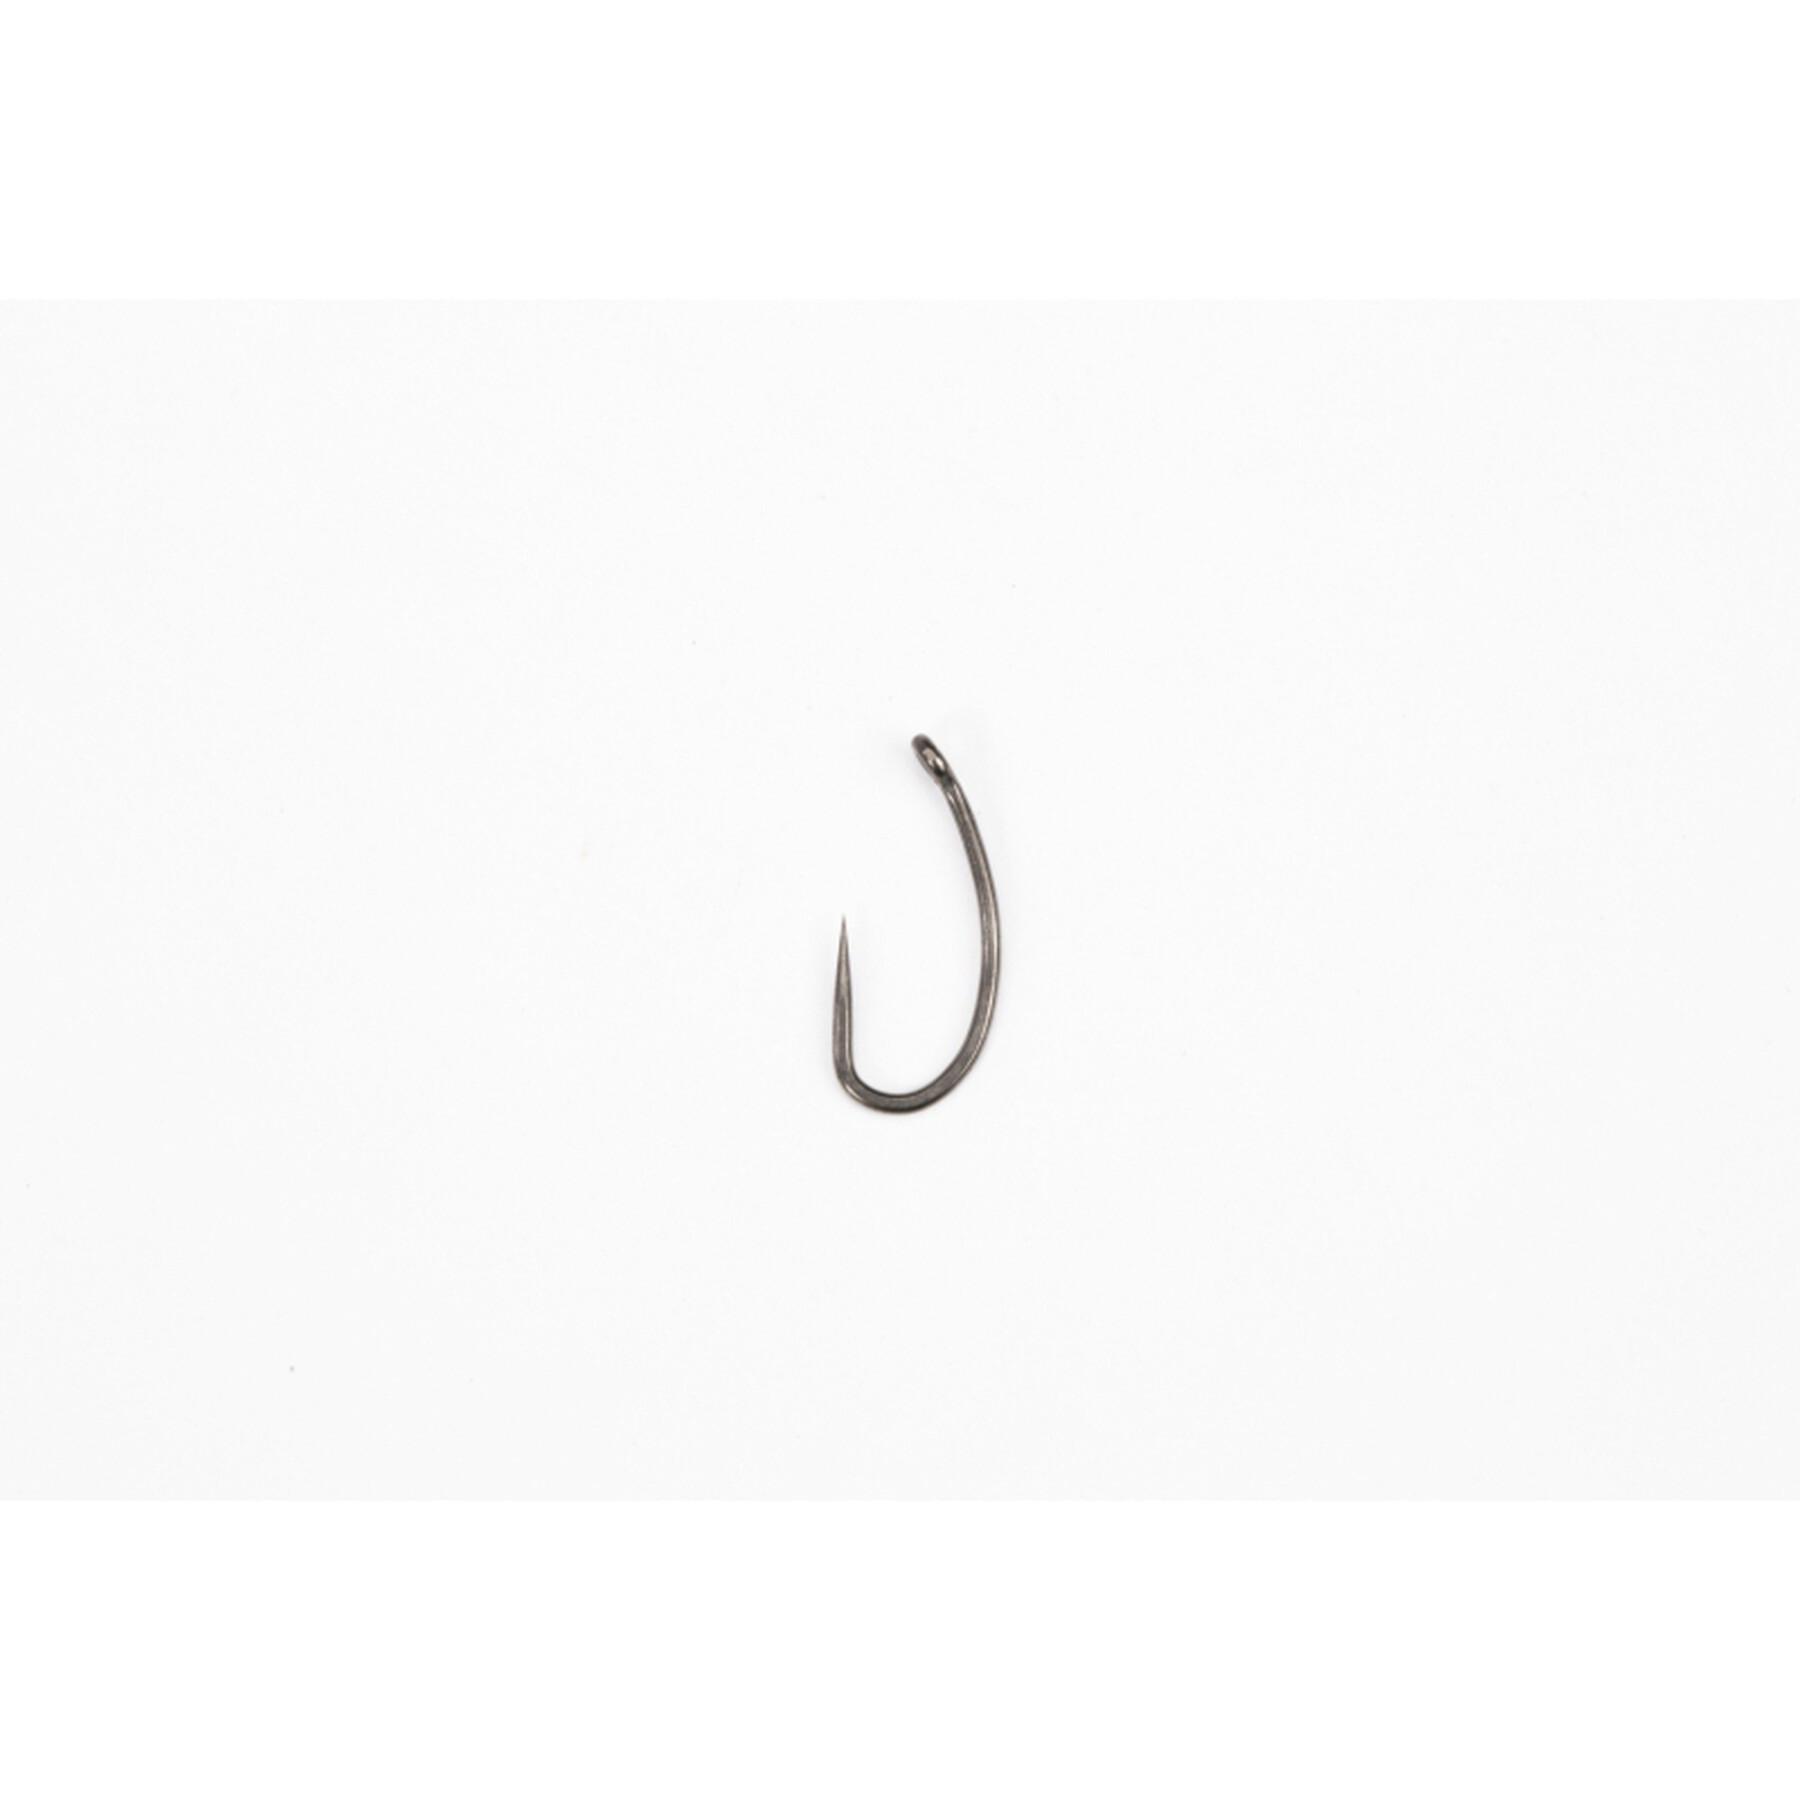 Hook Pinpoint Fang X size 10 without swivel